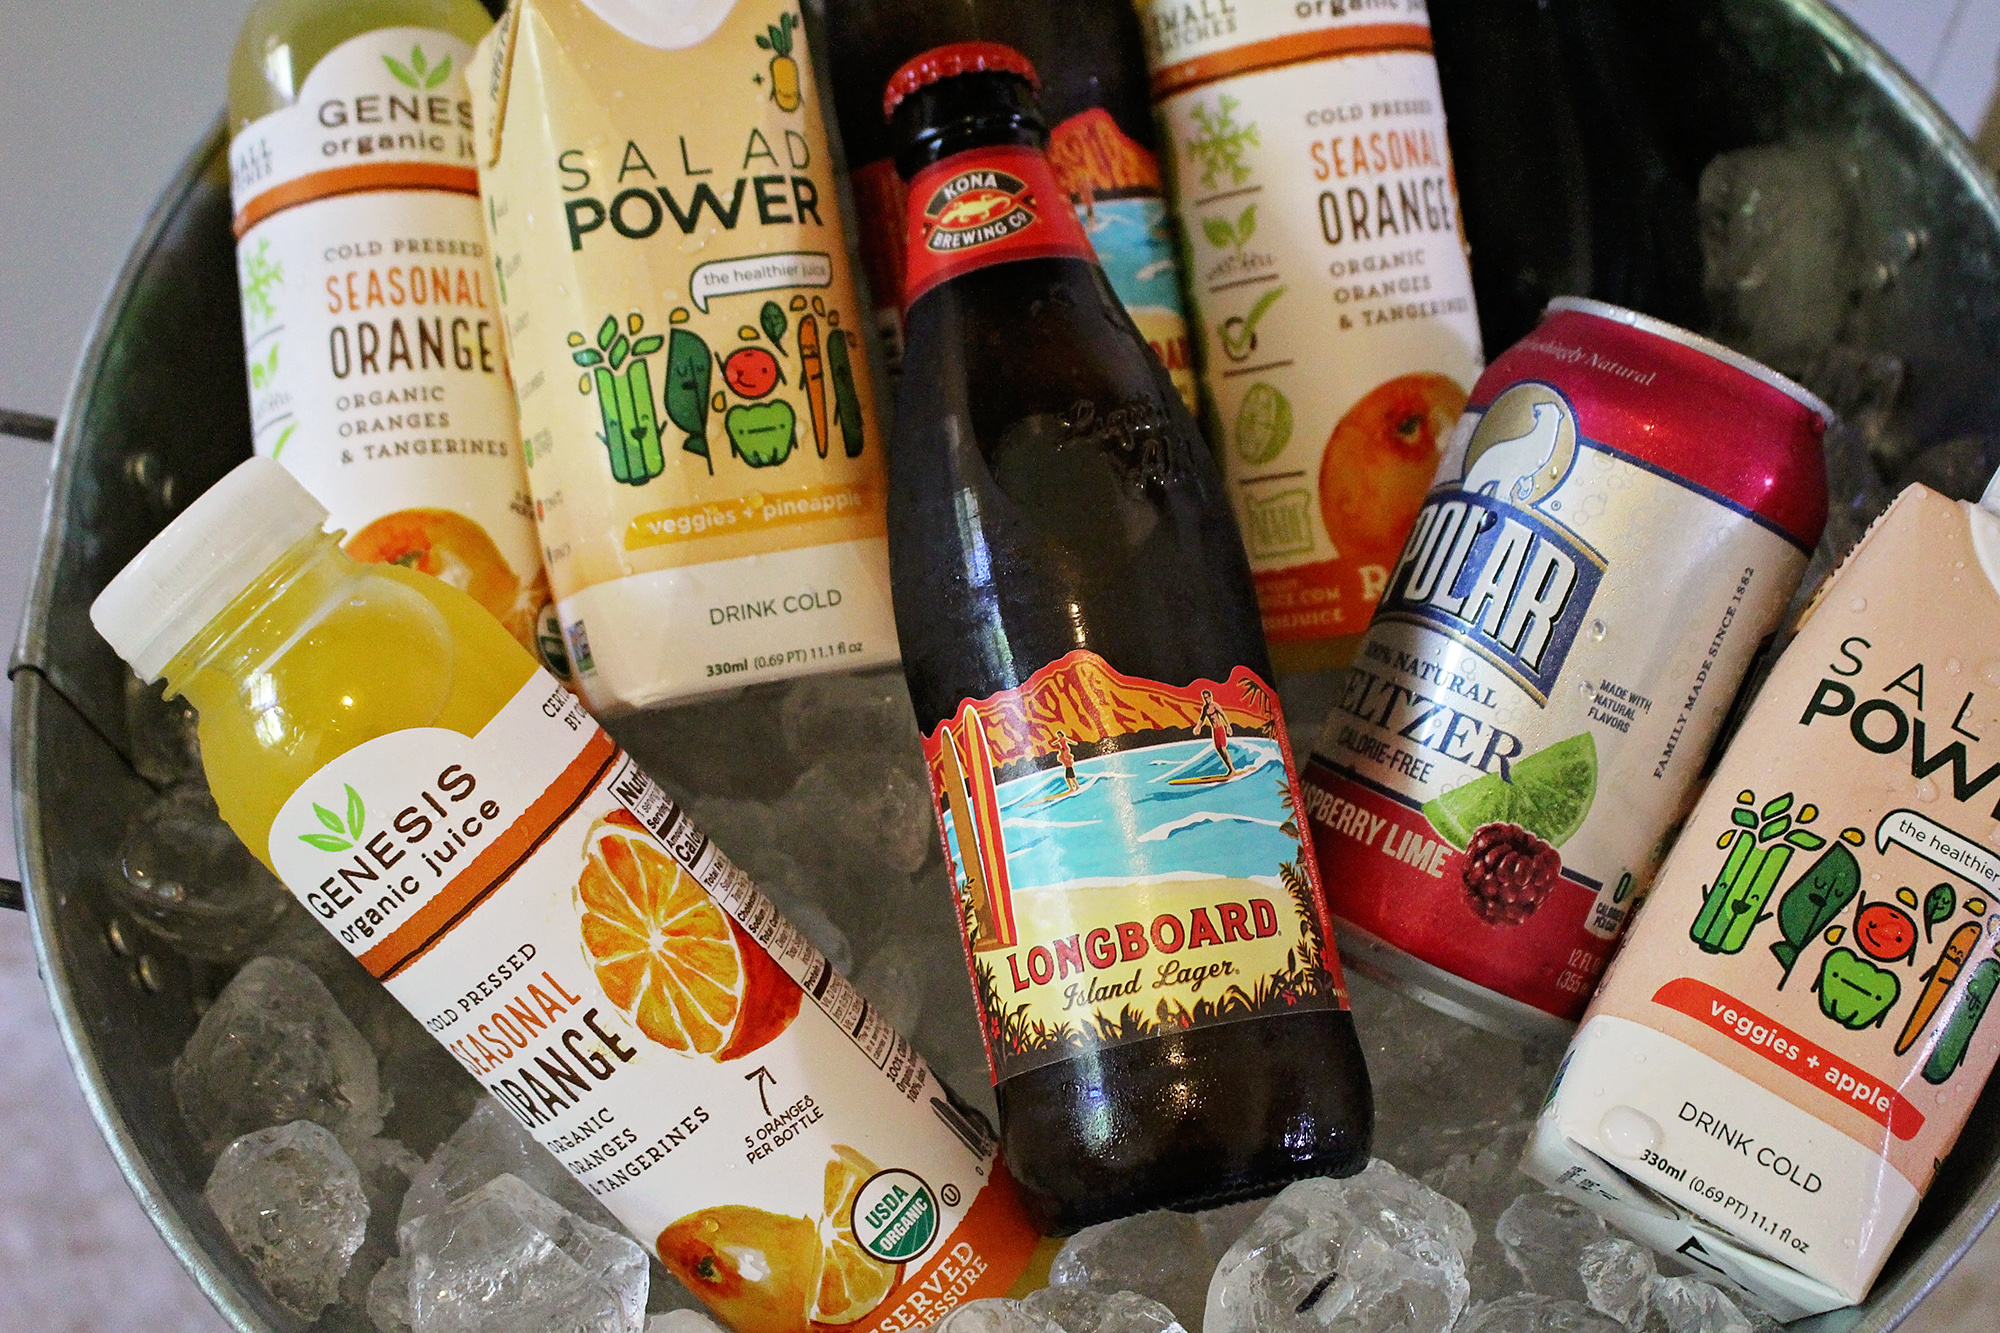 Vegan Brunch Beverage Ideas | A Well Crafted Party